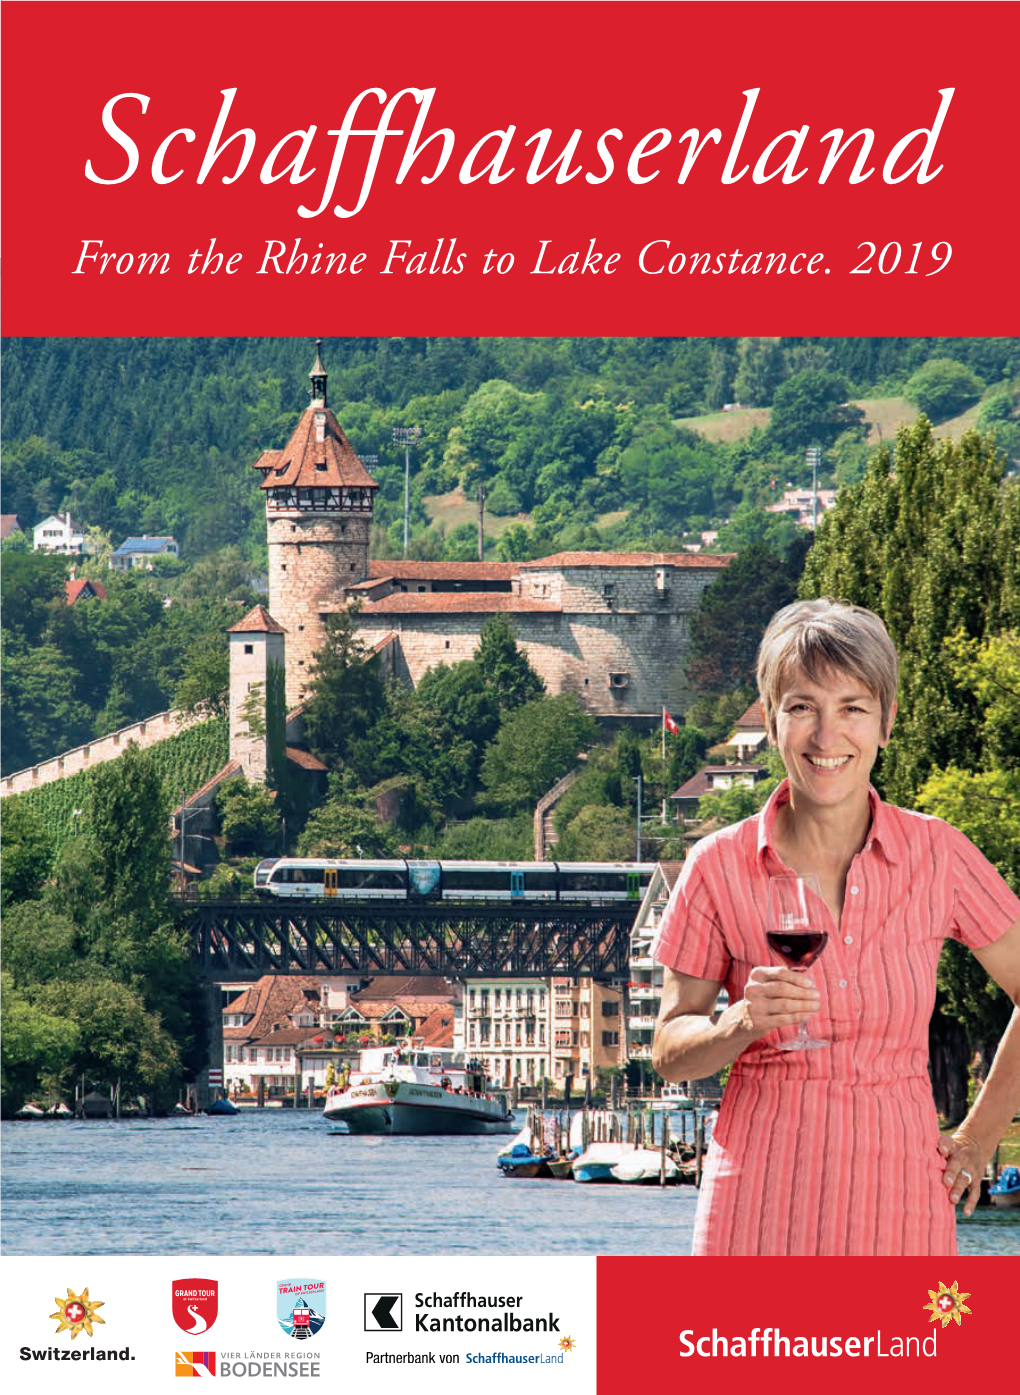 From the Rhine Falls to Lake Constance. 2019 Welcome